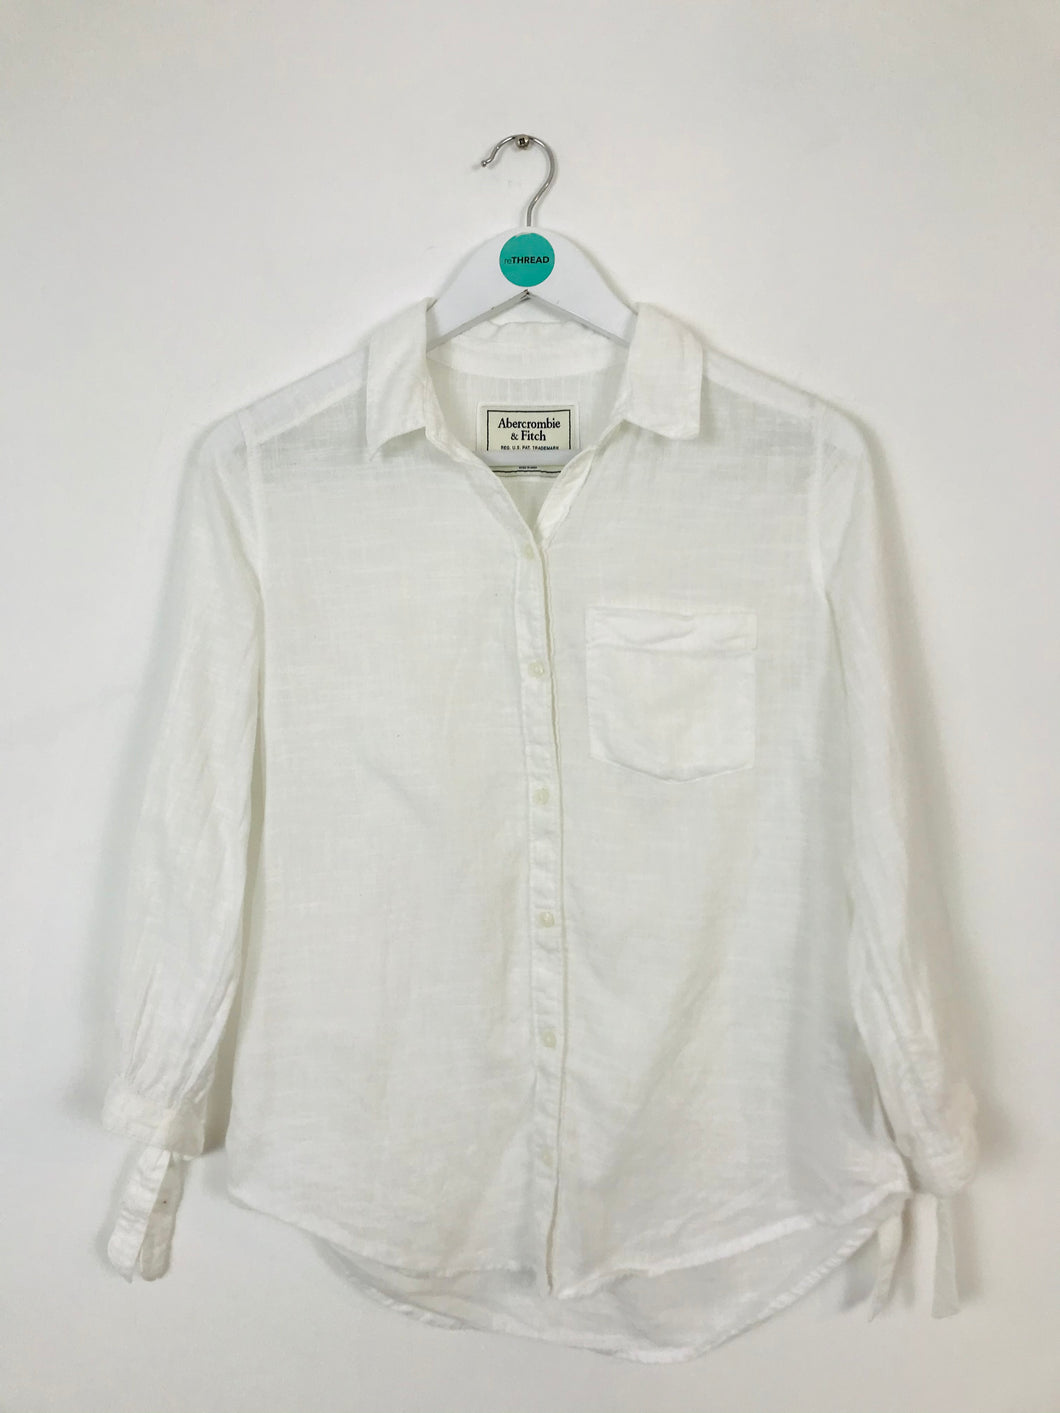 Abercrombie & Fitch Womens Shirt Blouse | XS | White